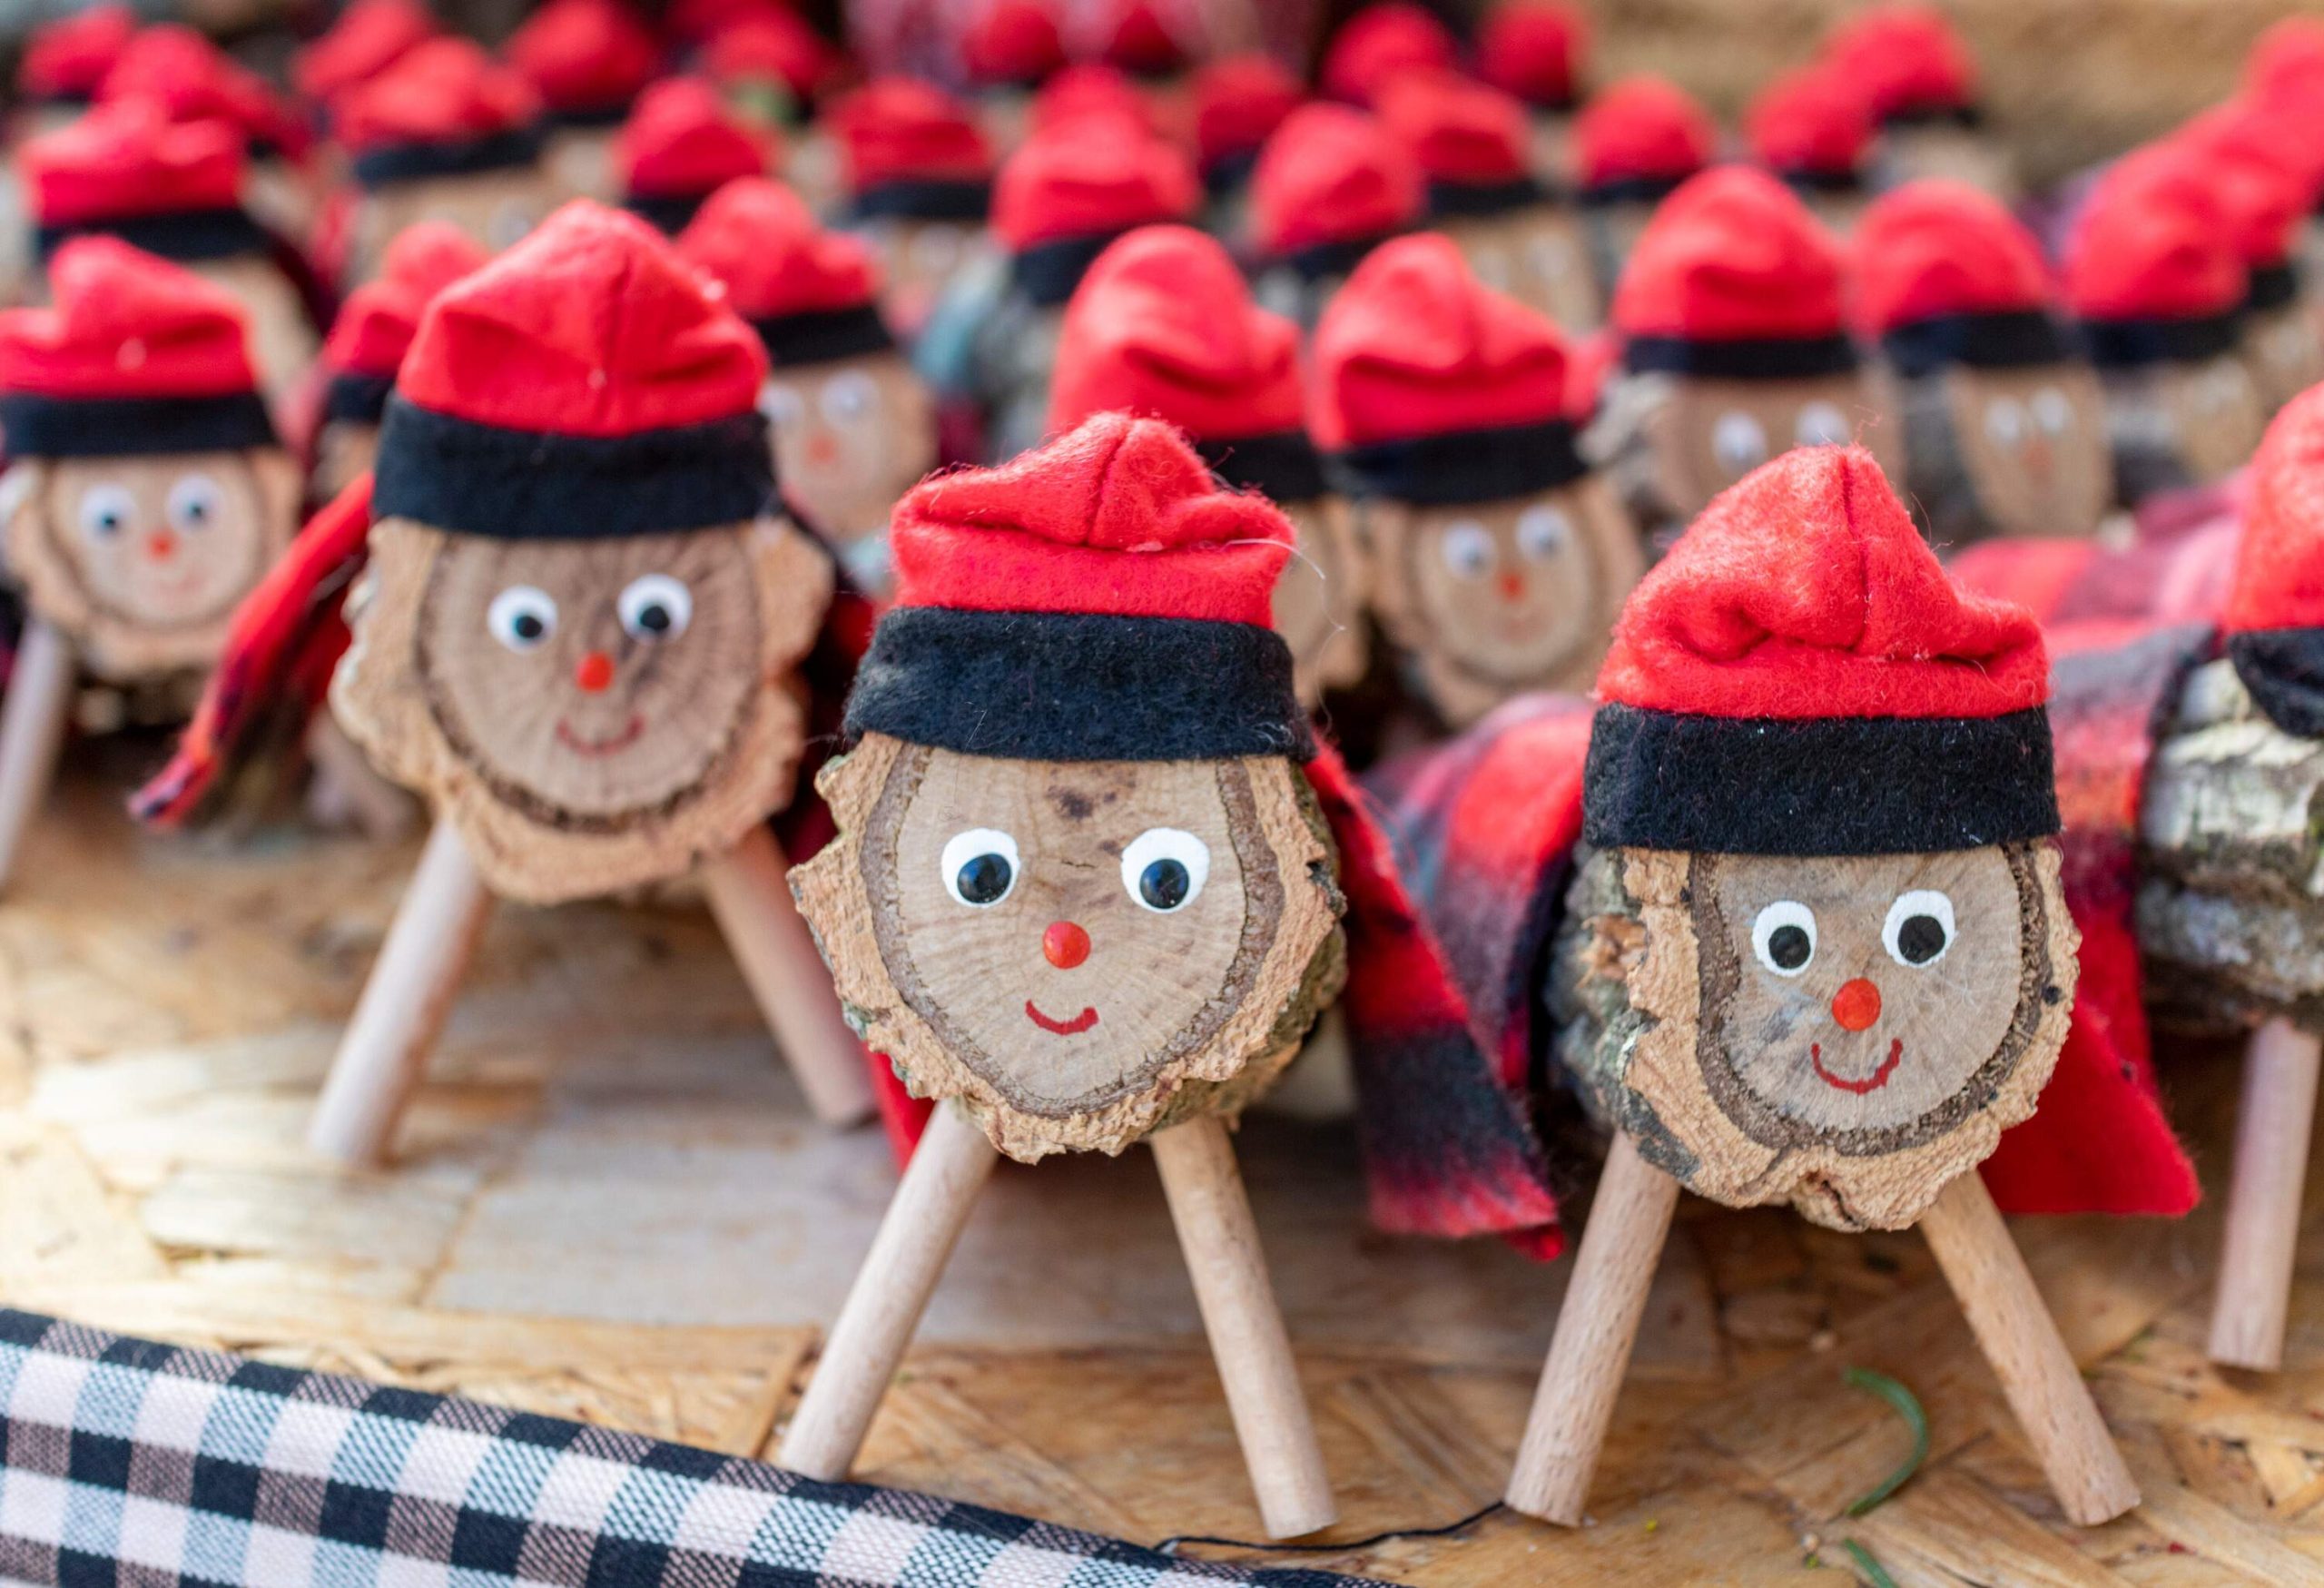 A bunch of chopped tree trunks placed on two sticks with a smiley face wearing a red cap.